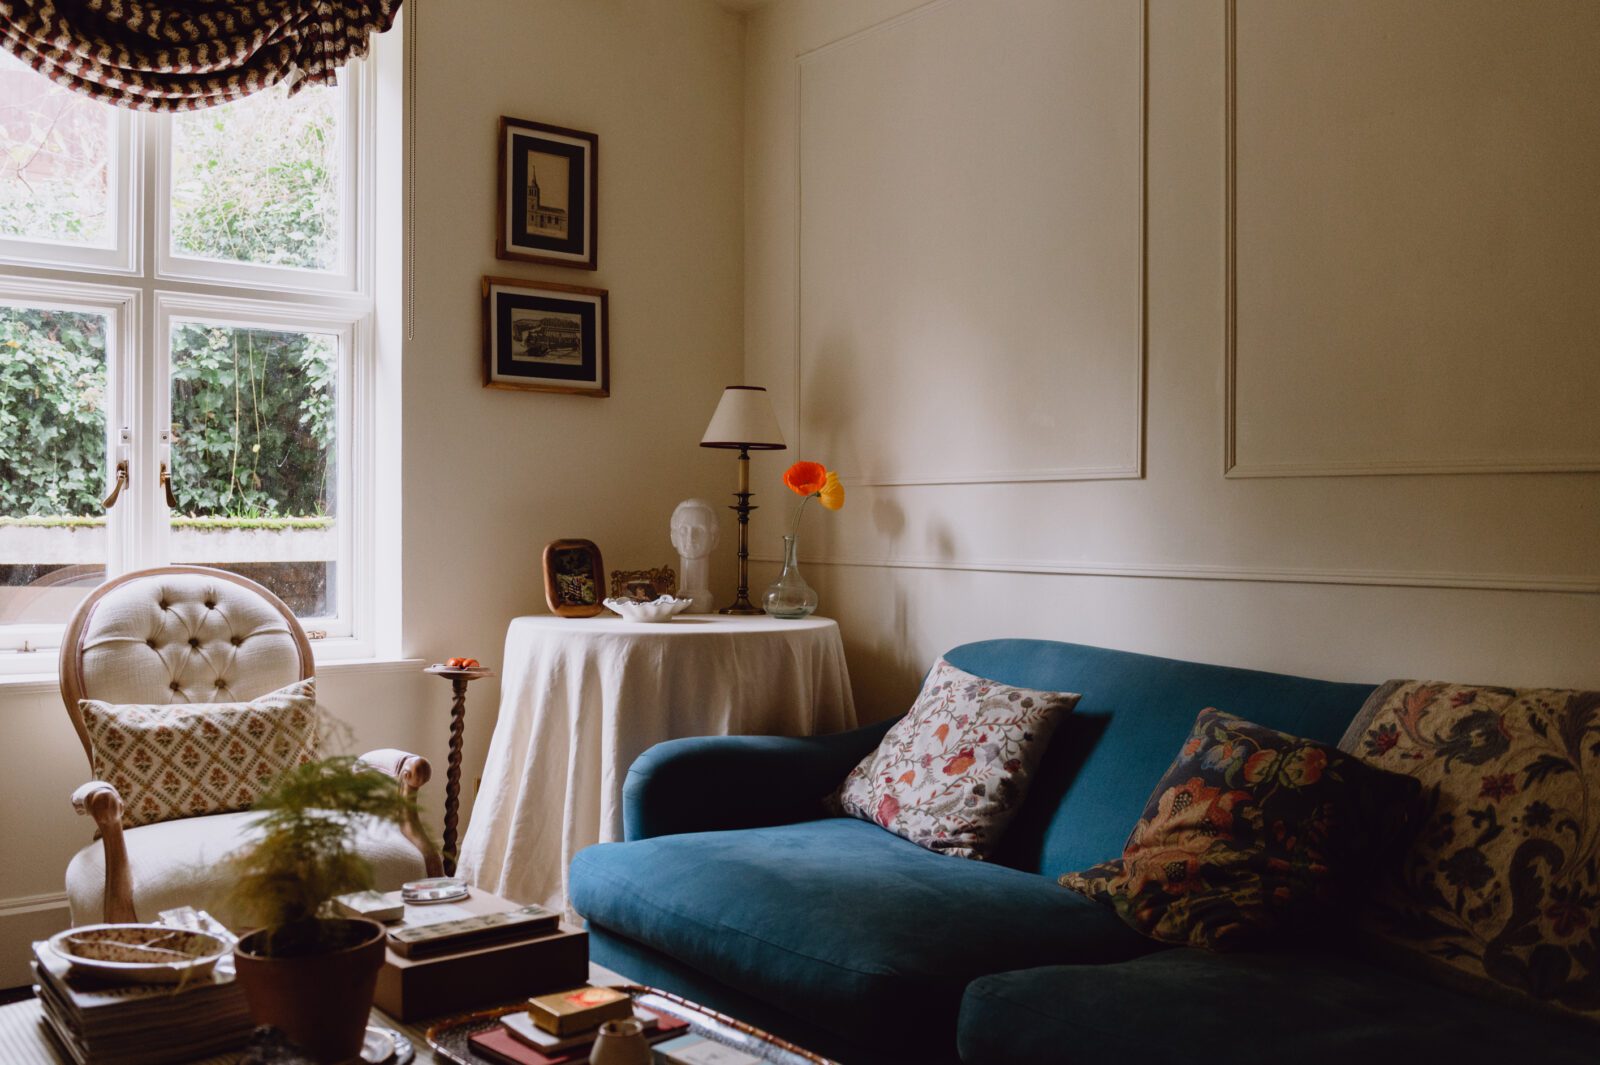 Gemma Moulton's House: Three Things I Love About It |  Knowledge & pleasure